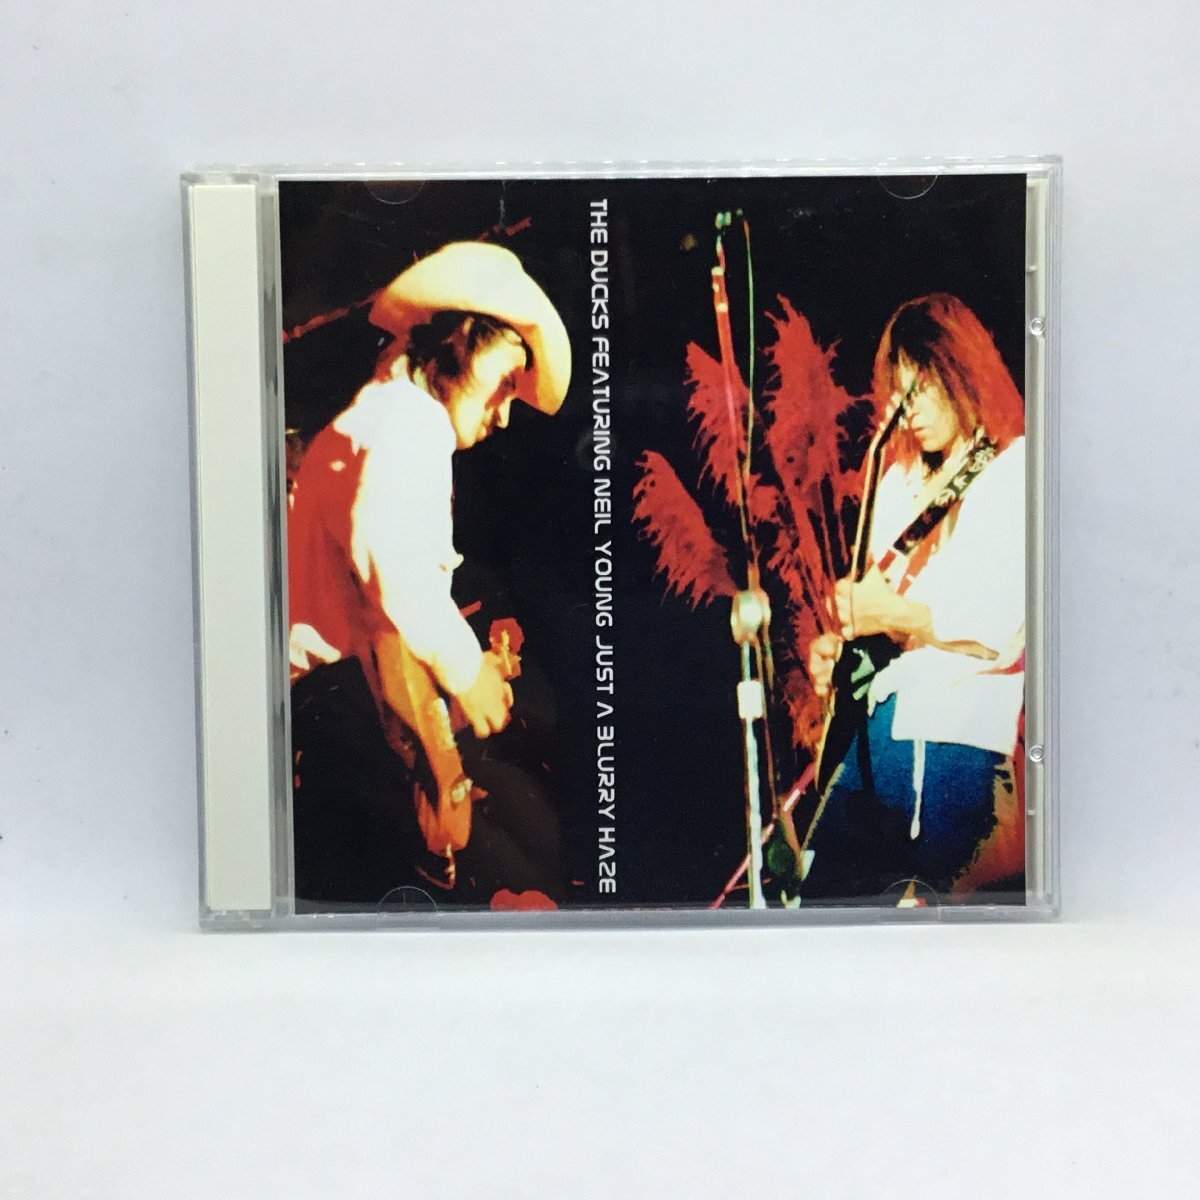 CD-R ◇ THE DUCKS FEATURING NEIL YOUNG / JUST A BLURRY HAZE (2CD-R) PF-308Dの画像1